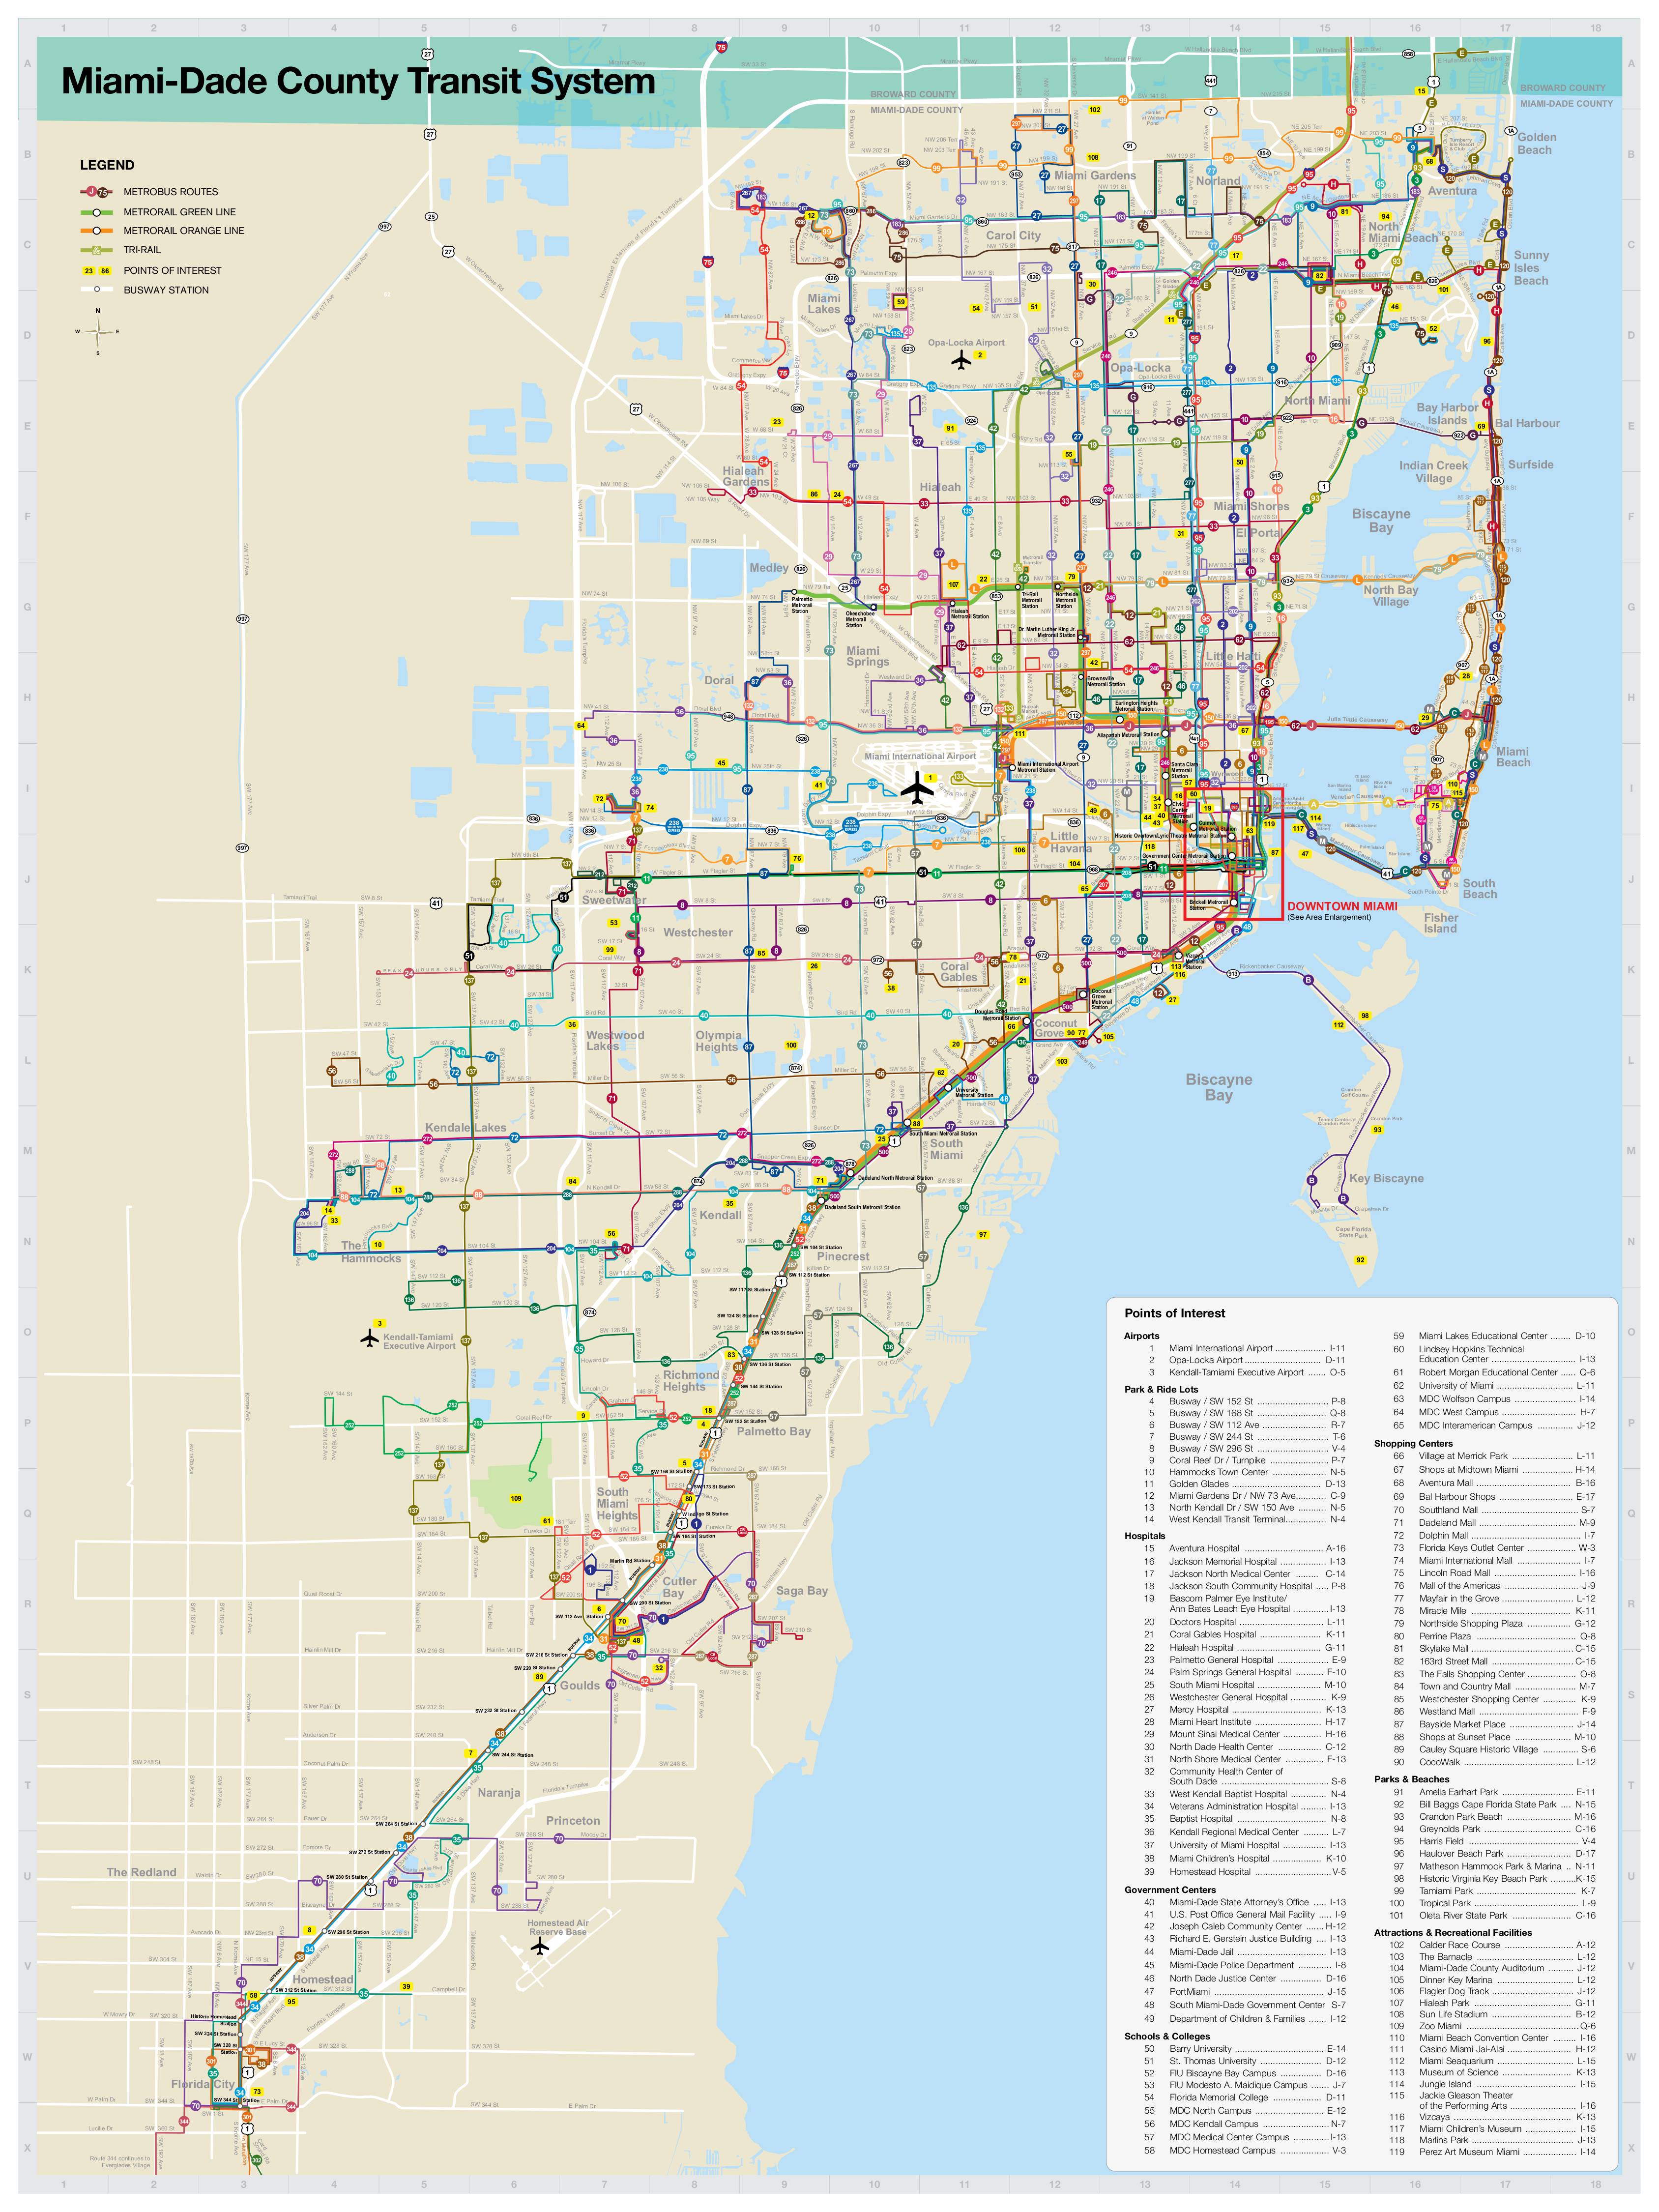 protected bike lanes master plan final report, august 2017